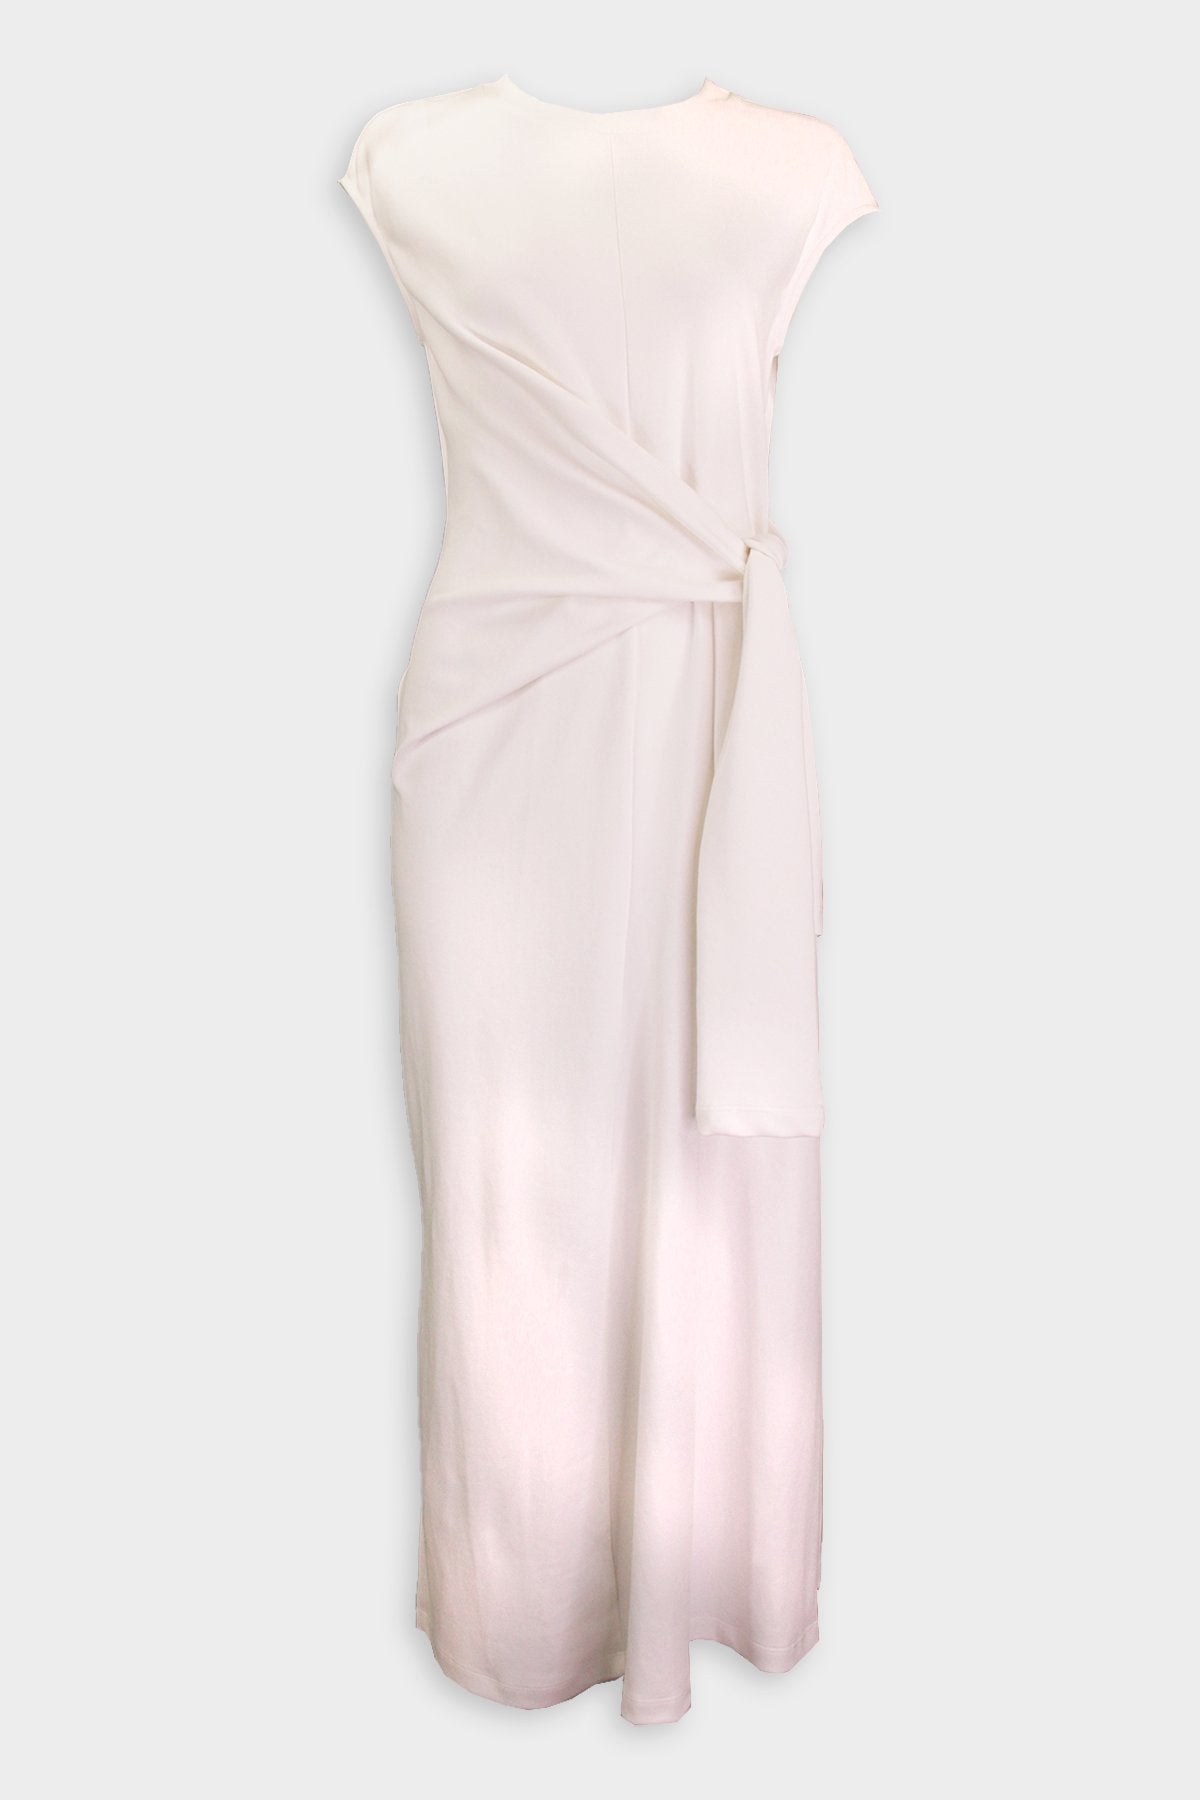 Knotted Detail Cotton Jersey Midi Dress in Ivory - shop-olivia.com